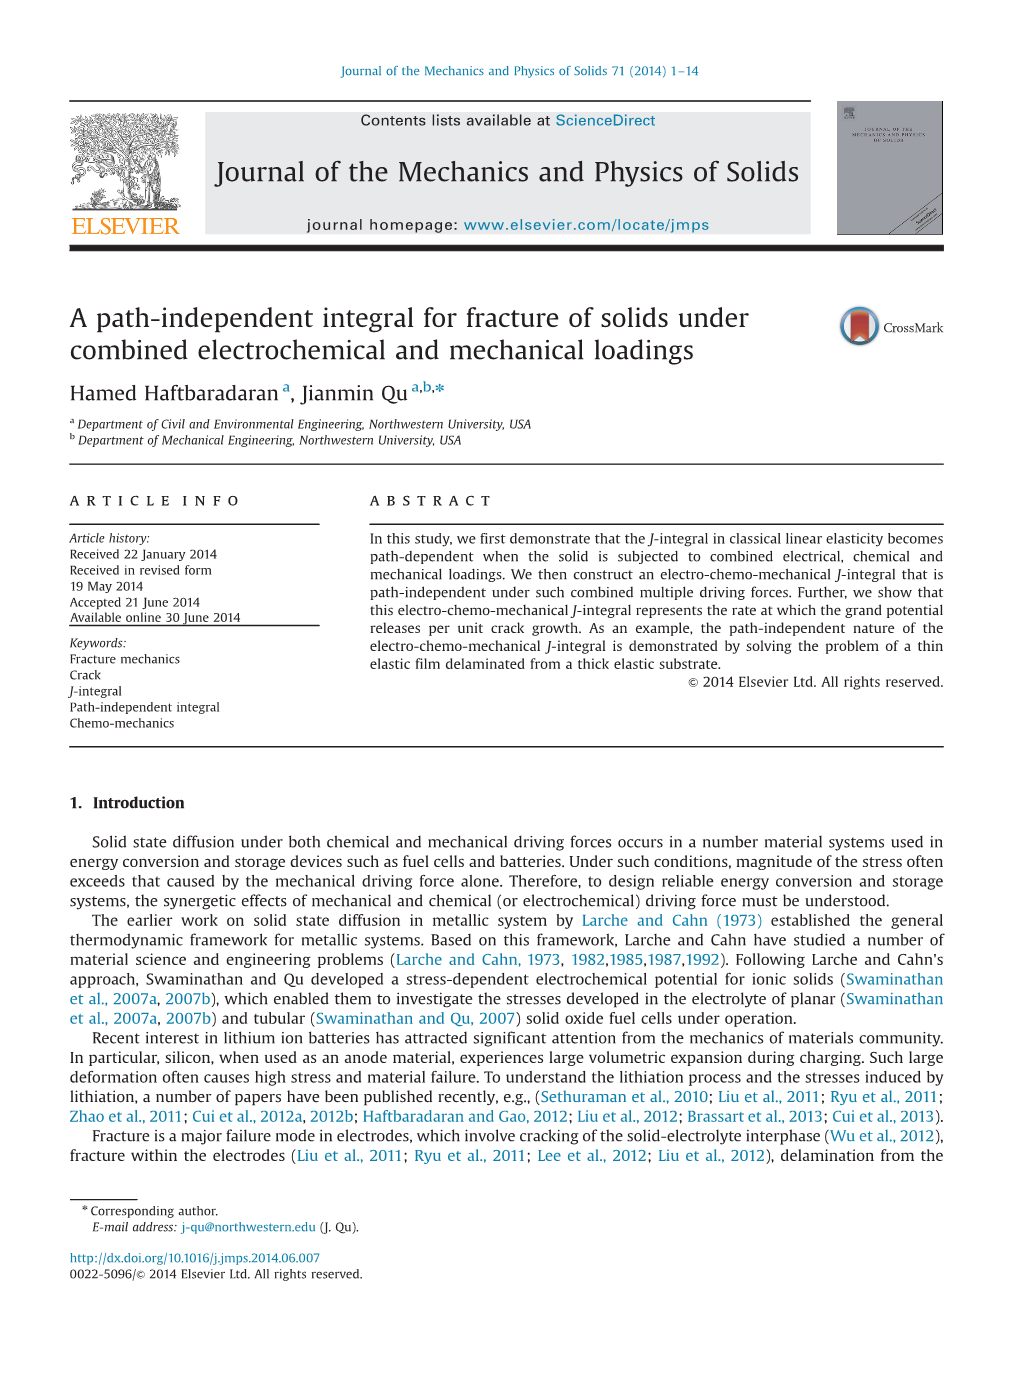 A Path-Independent Integral for Fracture of Solids Under Combined Electrochemical and Mechanical Loadings